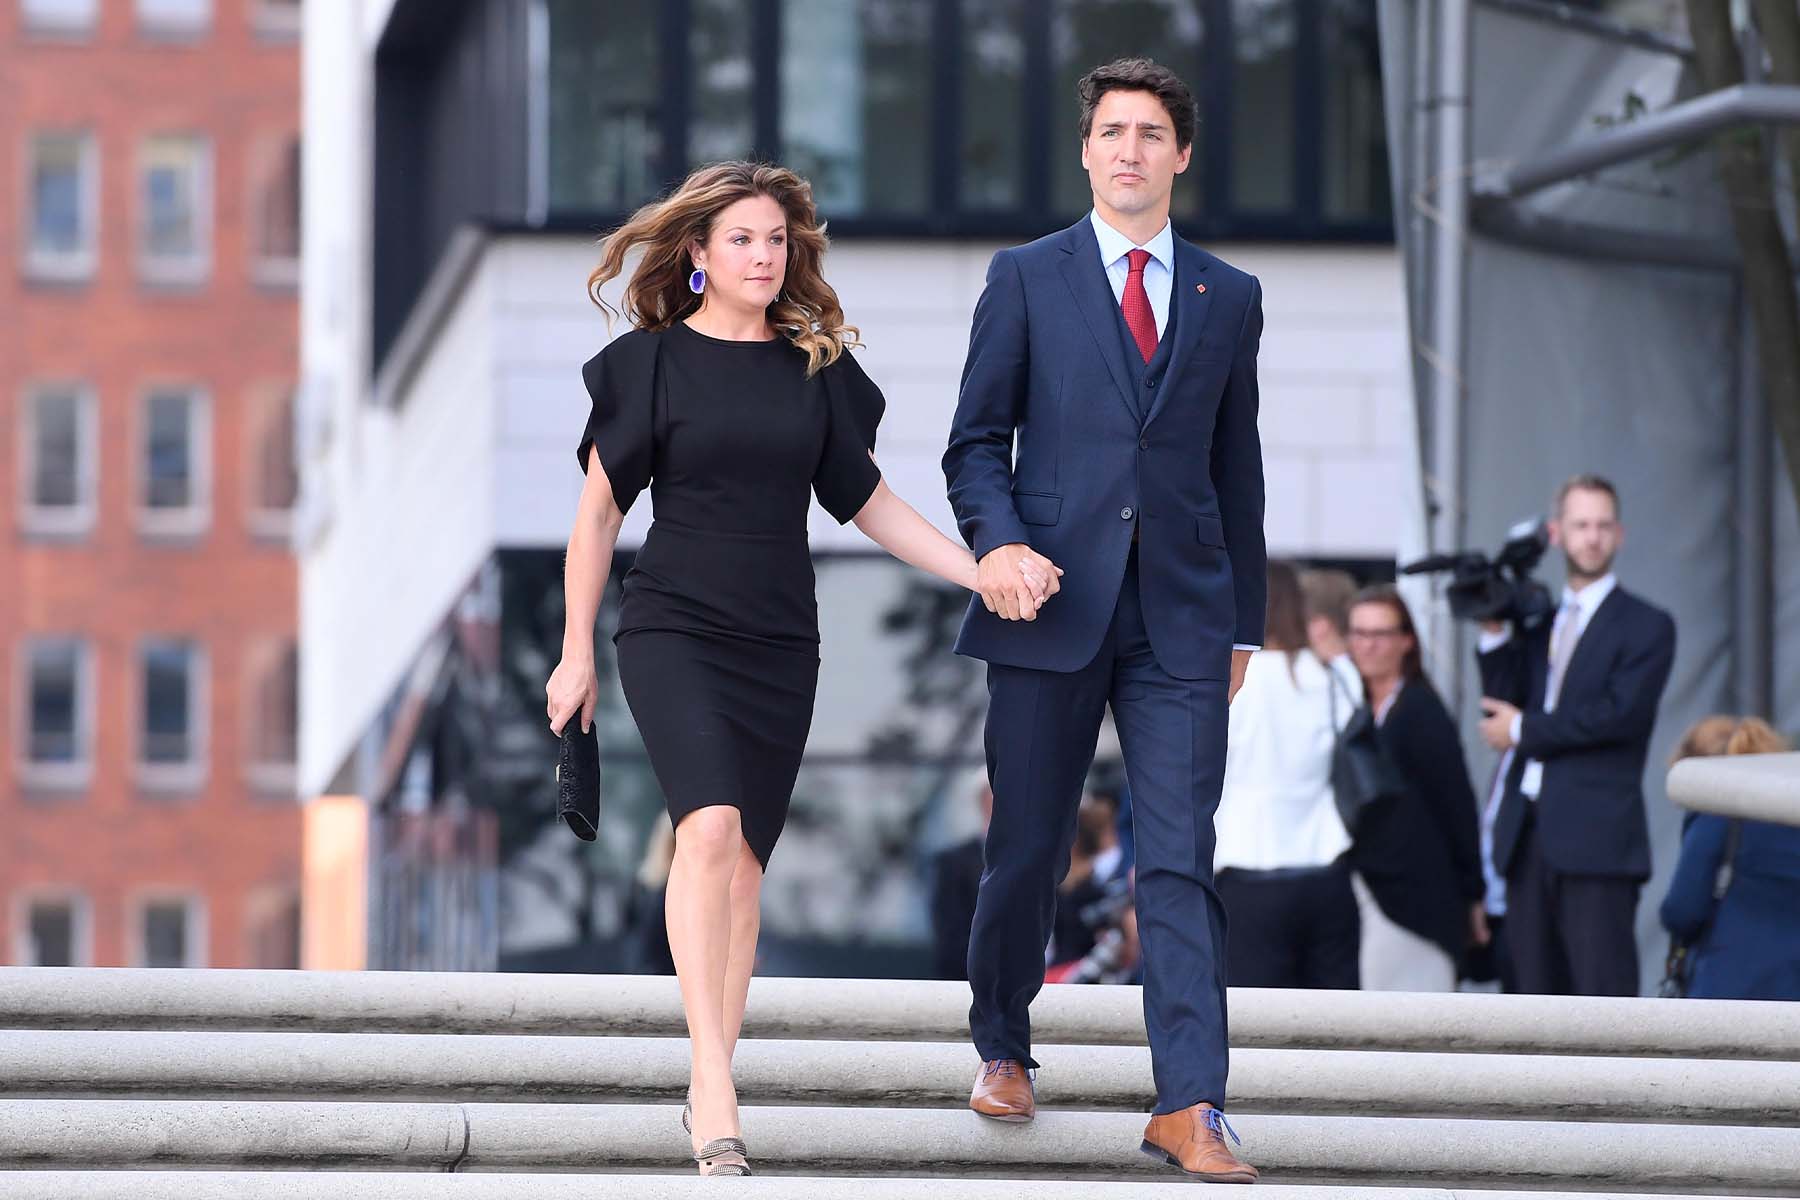 A 2017 photo of Prime Minister Justin Trudeau and his then-wife Sophie Gregoire Trudeau in Hamburg, Germany.